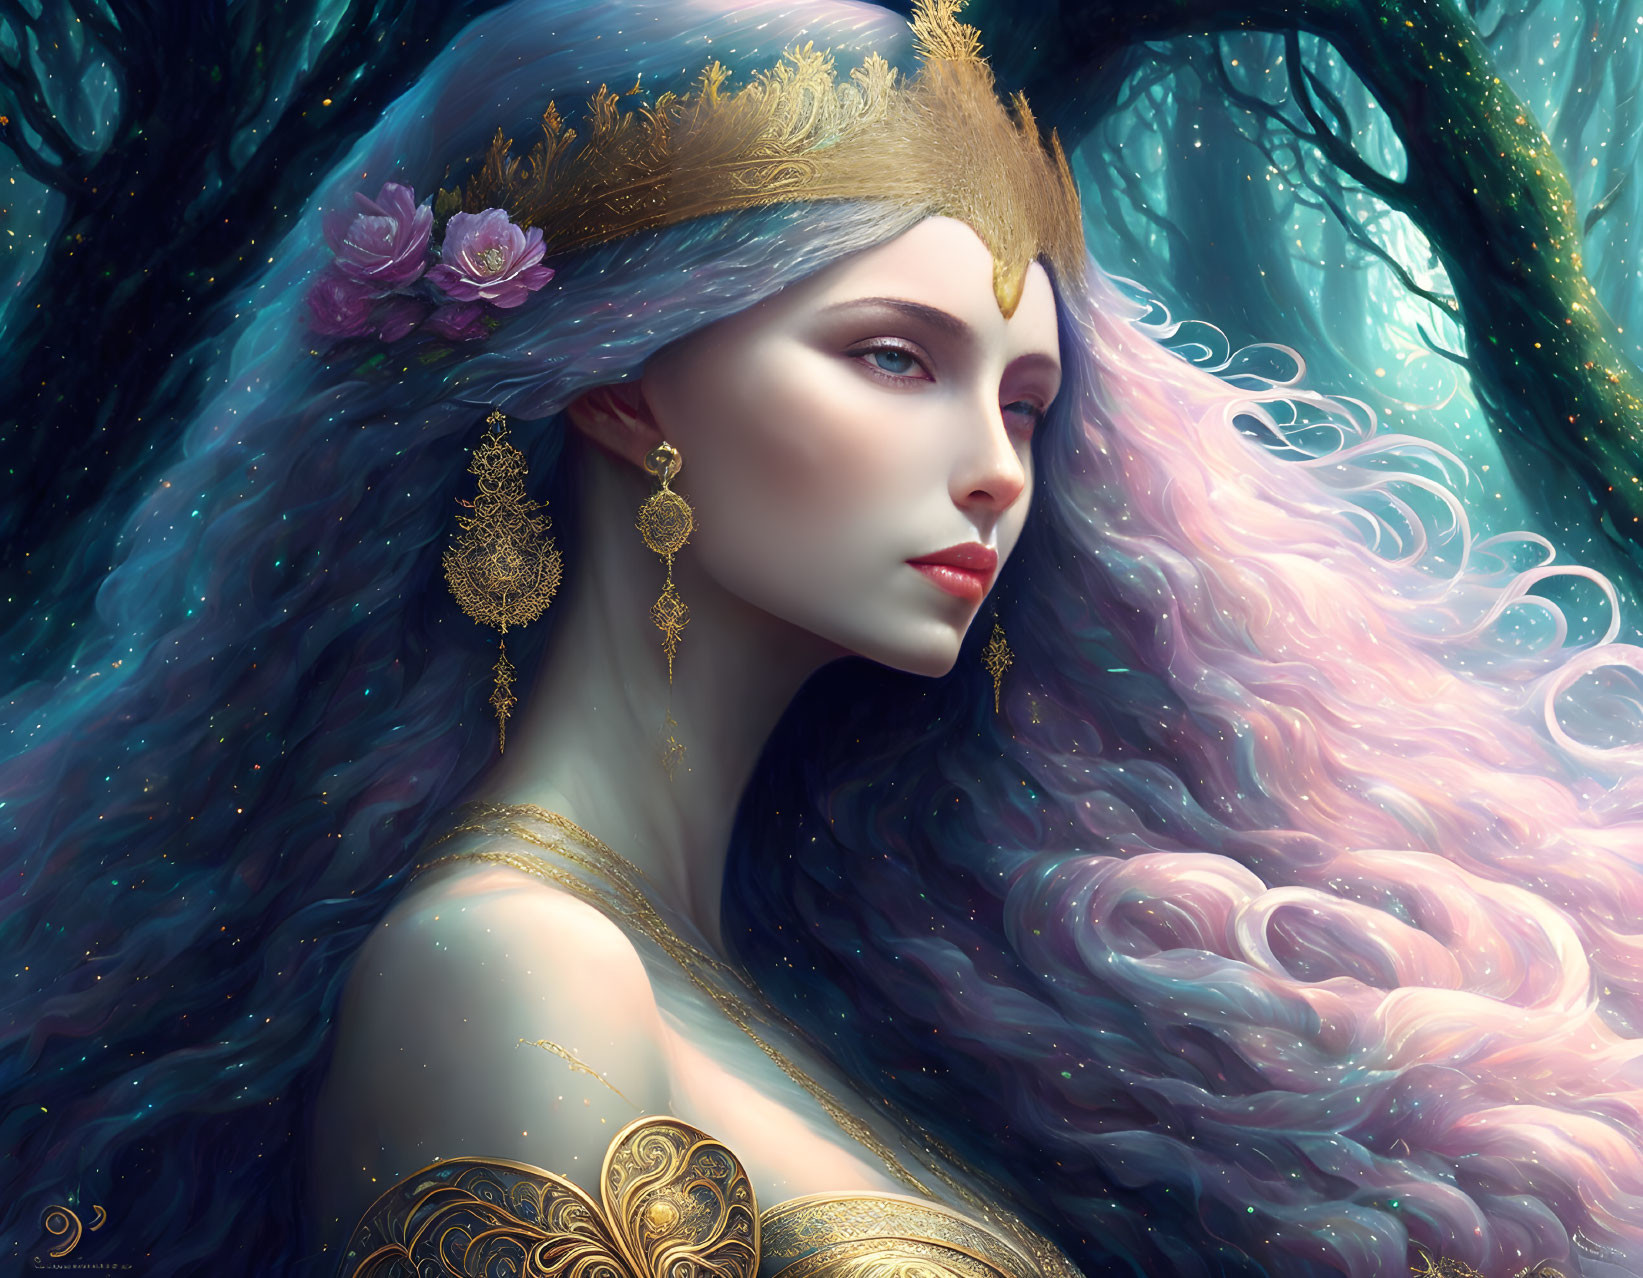 Fantasy woman with golden crown and violet hair in ethereal forest